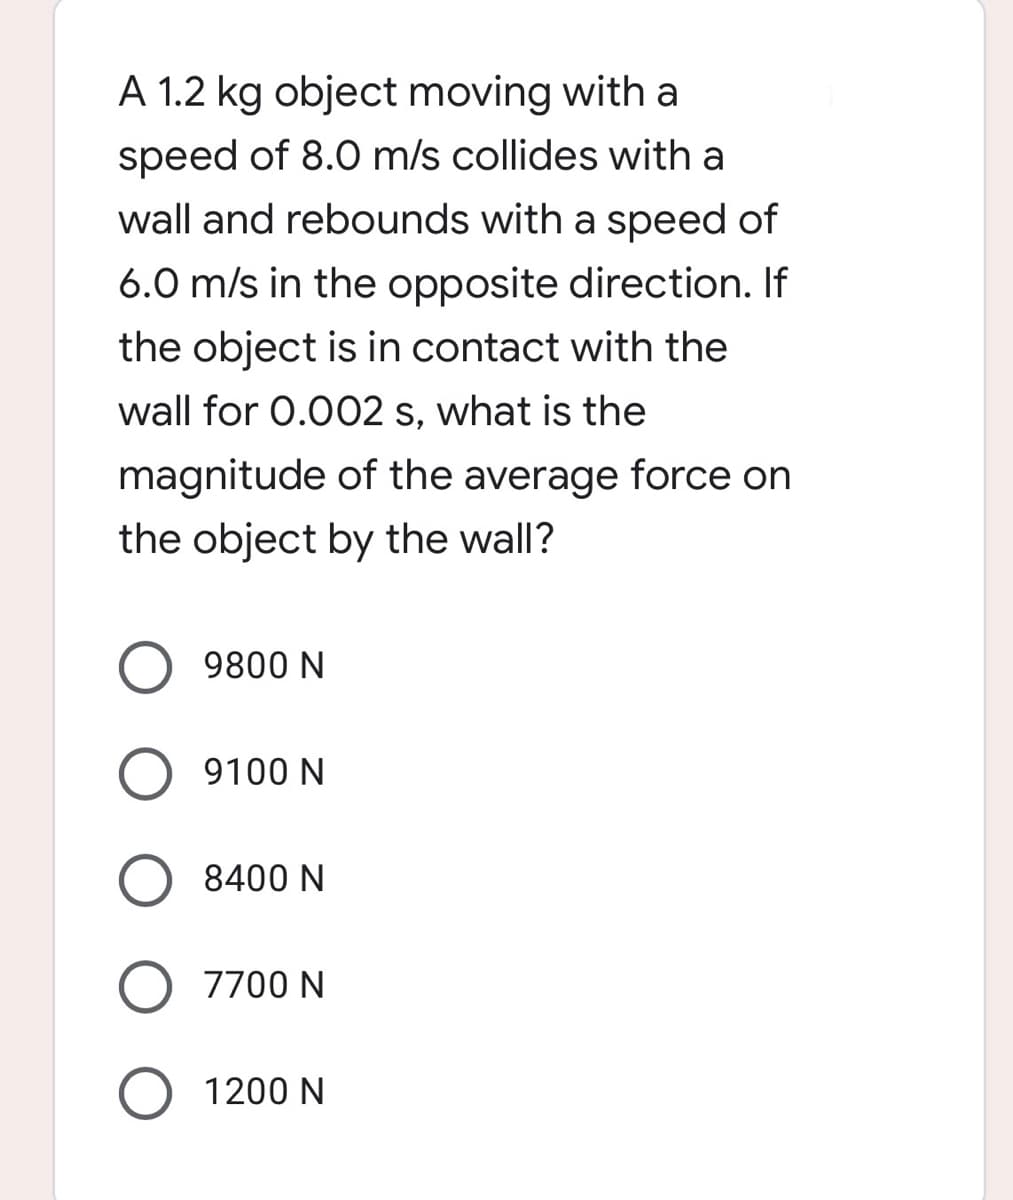 A 1.2 kg object moving with a
speed of 8.0 m/s collides with a
wall and rebounds with a speed of
6.0 m/s in the opposite direction. If
the object is in contact with the
wall for 0.002 s, what is the
magnitude of the average force on
the object by the wall?
9800 N
O 9100 N
8400 N
O 7700 N
O
1200 N